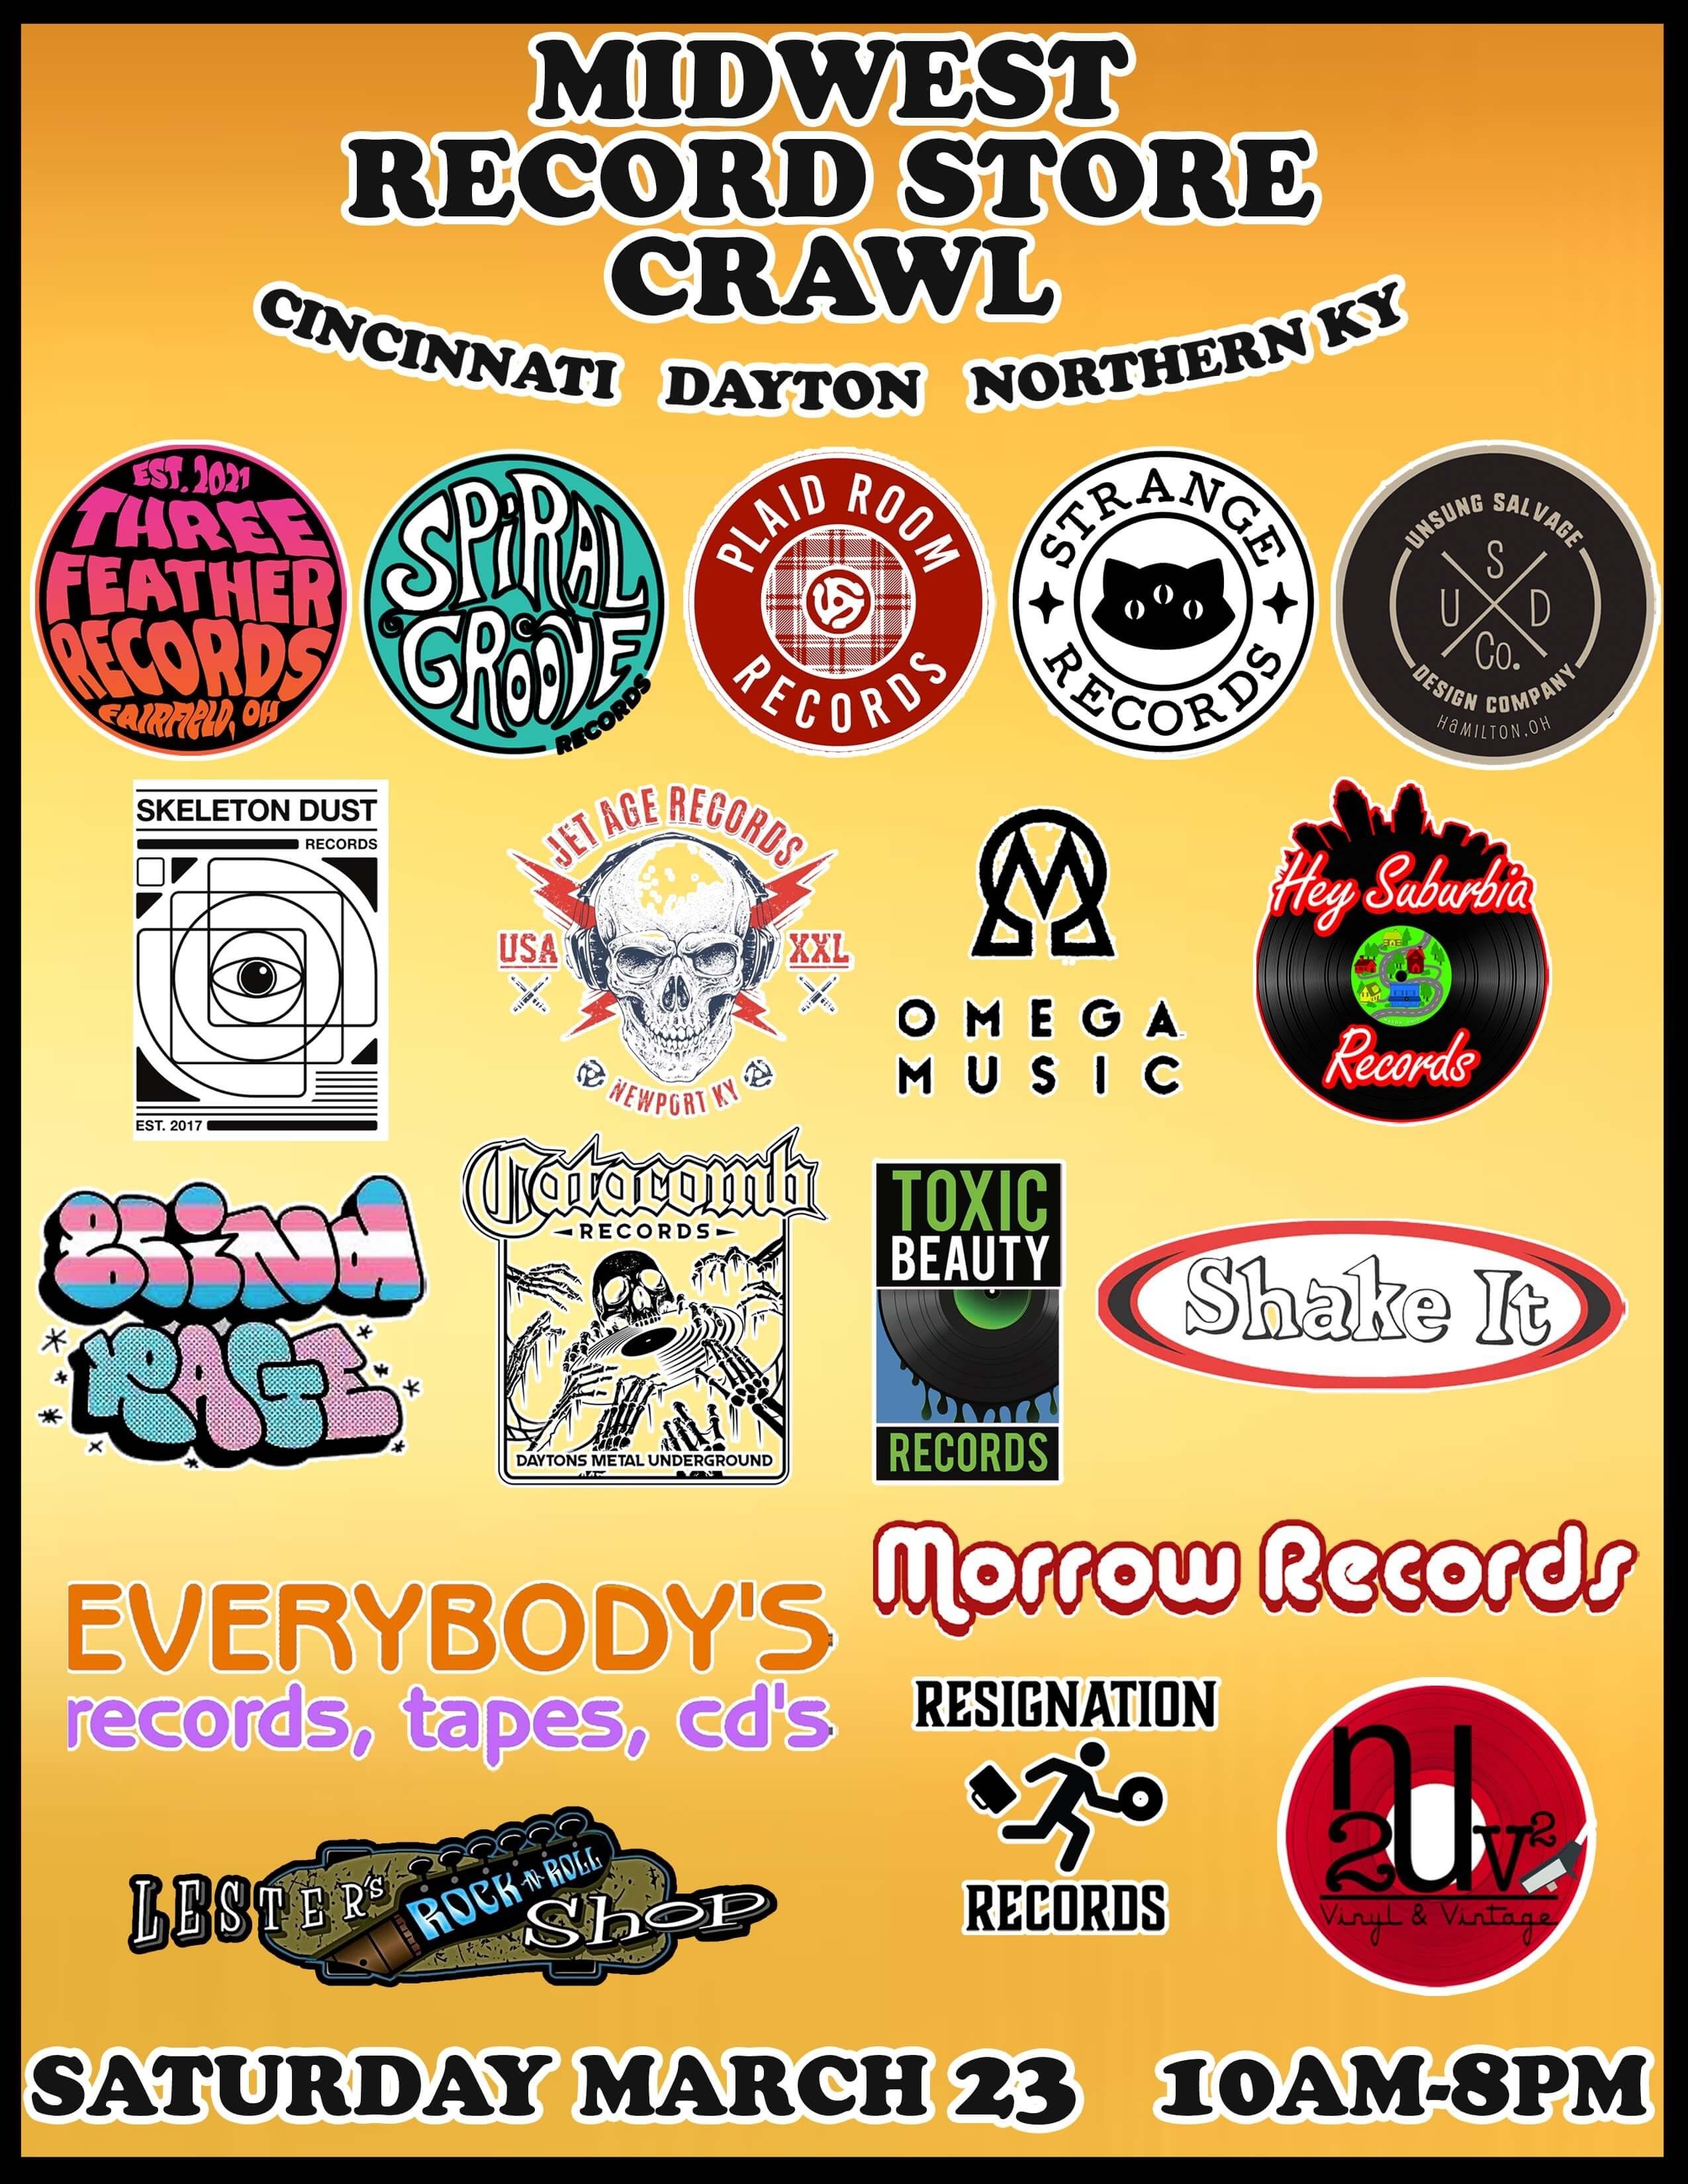 Midwest Record Store Crawl